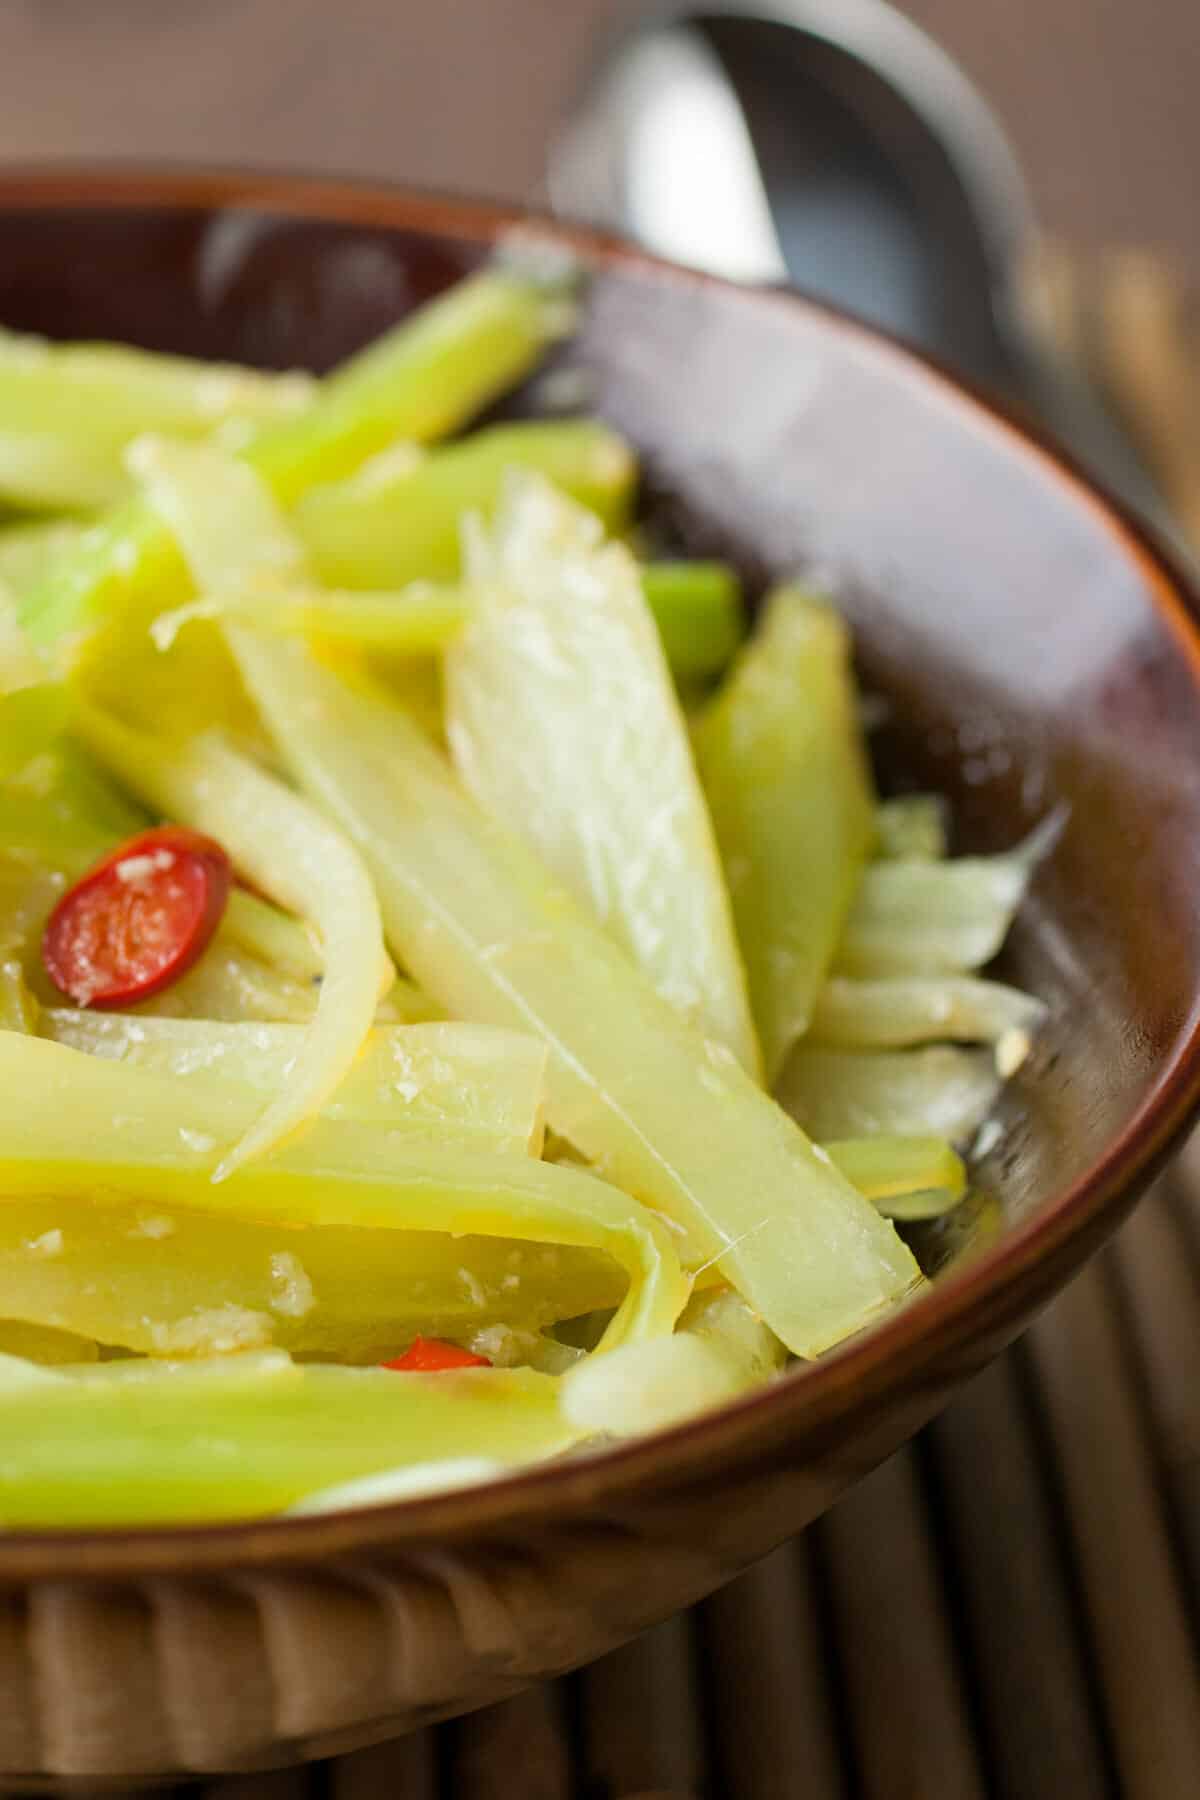 Hot Flash Celery Salad: One of my favorite new side dishes, flash cooked celery over high heat with a simple spicy and sweet dressing. Just a few ingredients and super delicious! | macheesmo.com